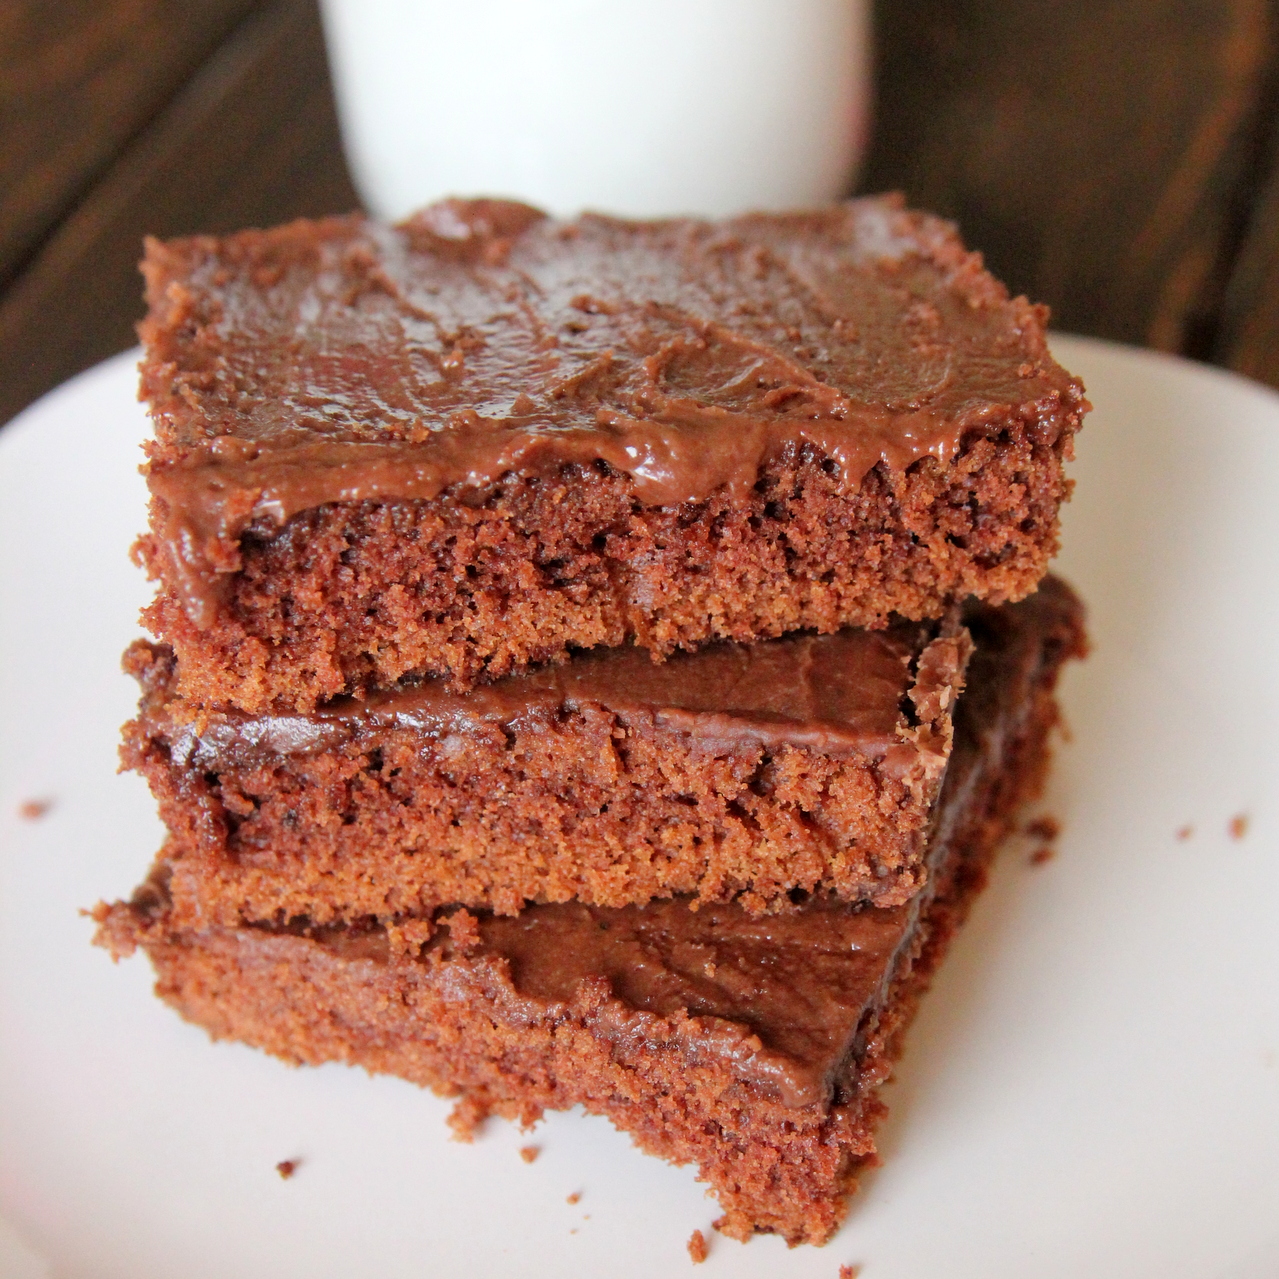 texas sheet cake recipe (have you ever tried this chocolate cake (with a little cinnamon and boiled frosting)